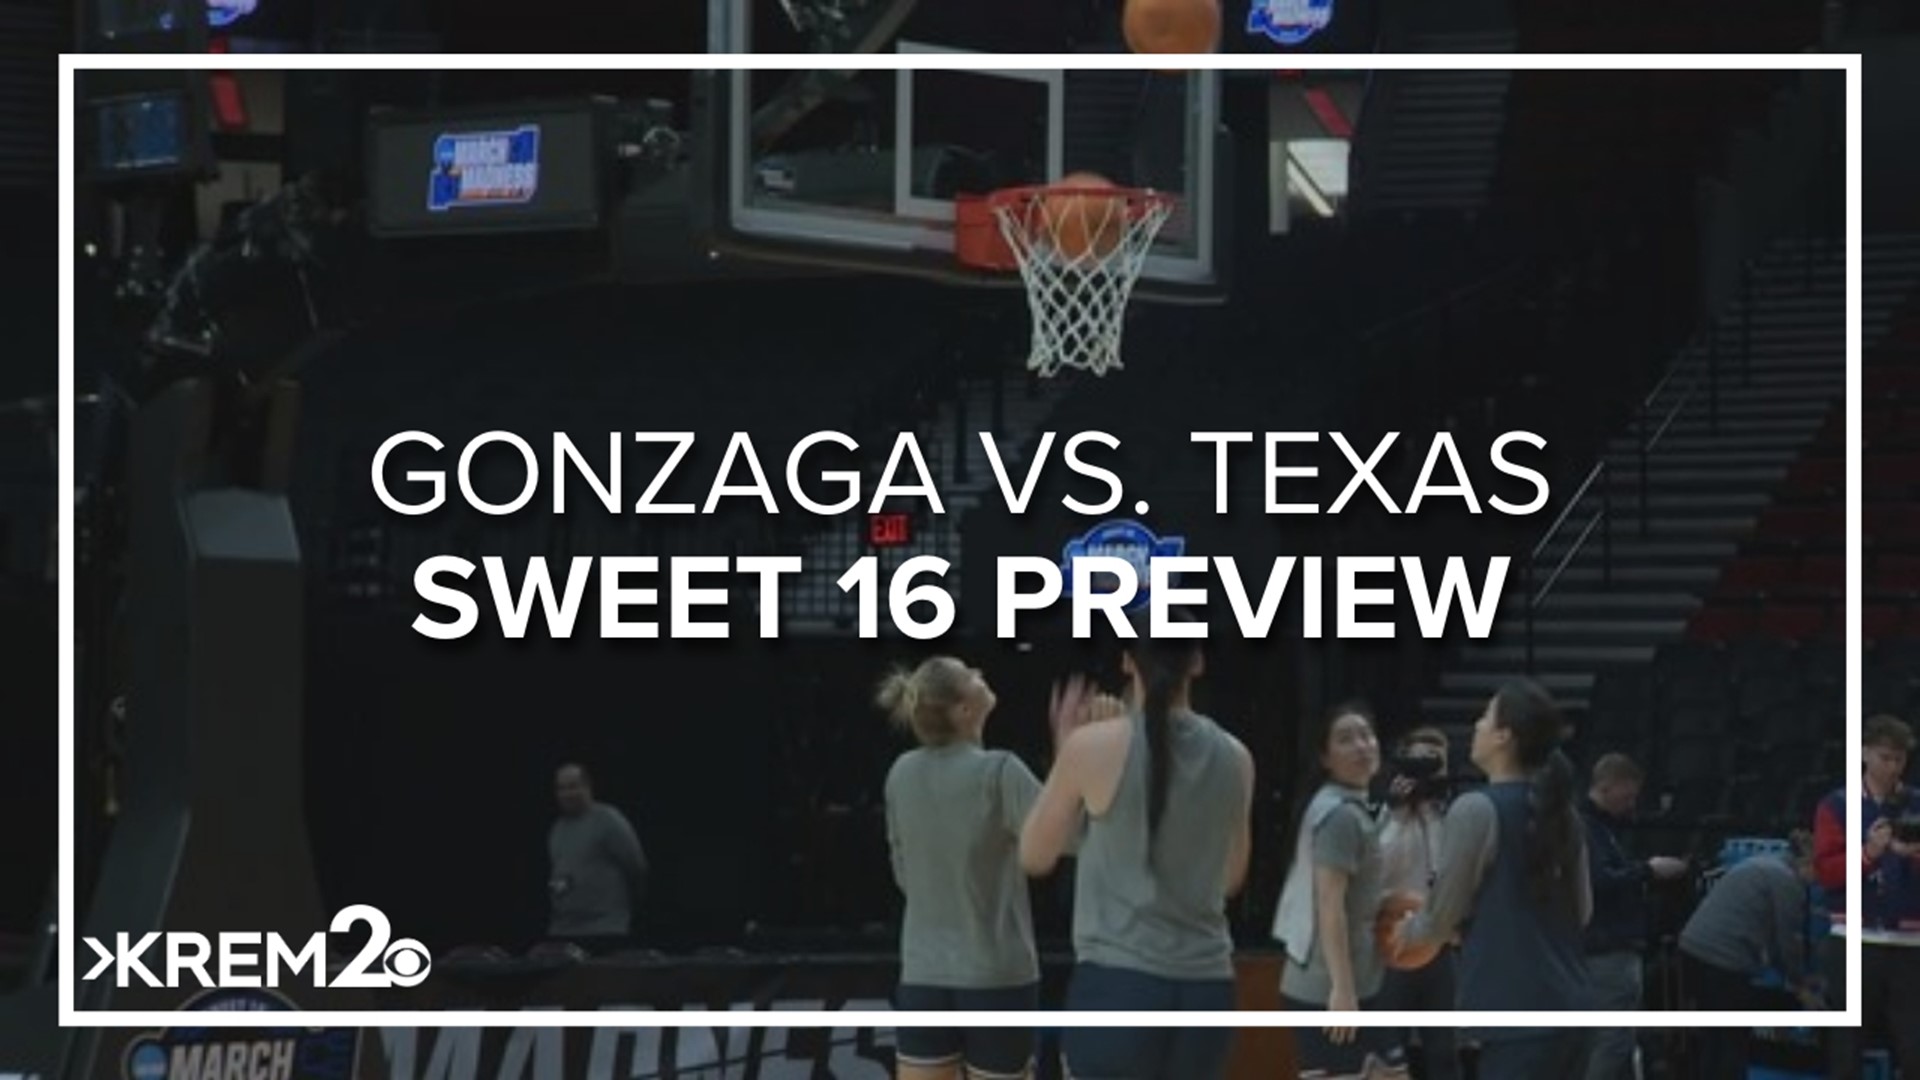 The #4 Gonzaga Bulldogs vs the #1 Texas Longhorns NCAA Tournament basketball game will tip off at 7:00 p.m. on Friday, March 29.